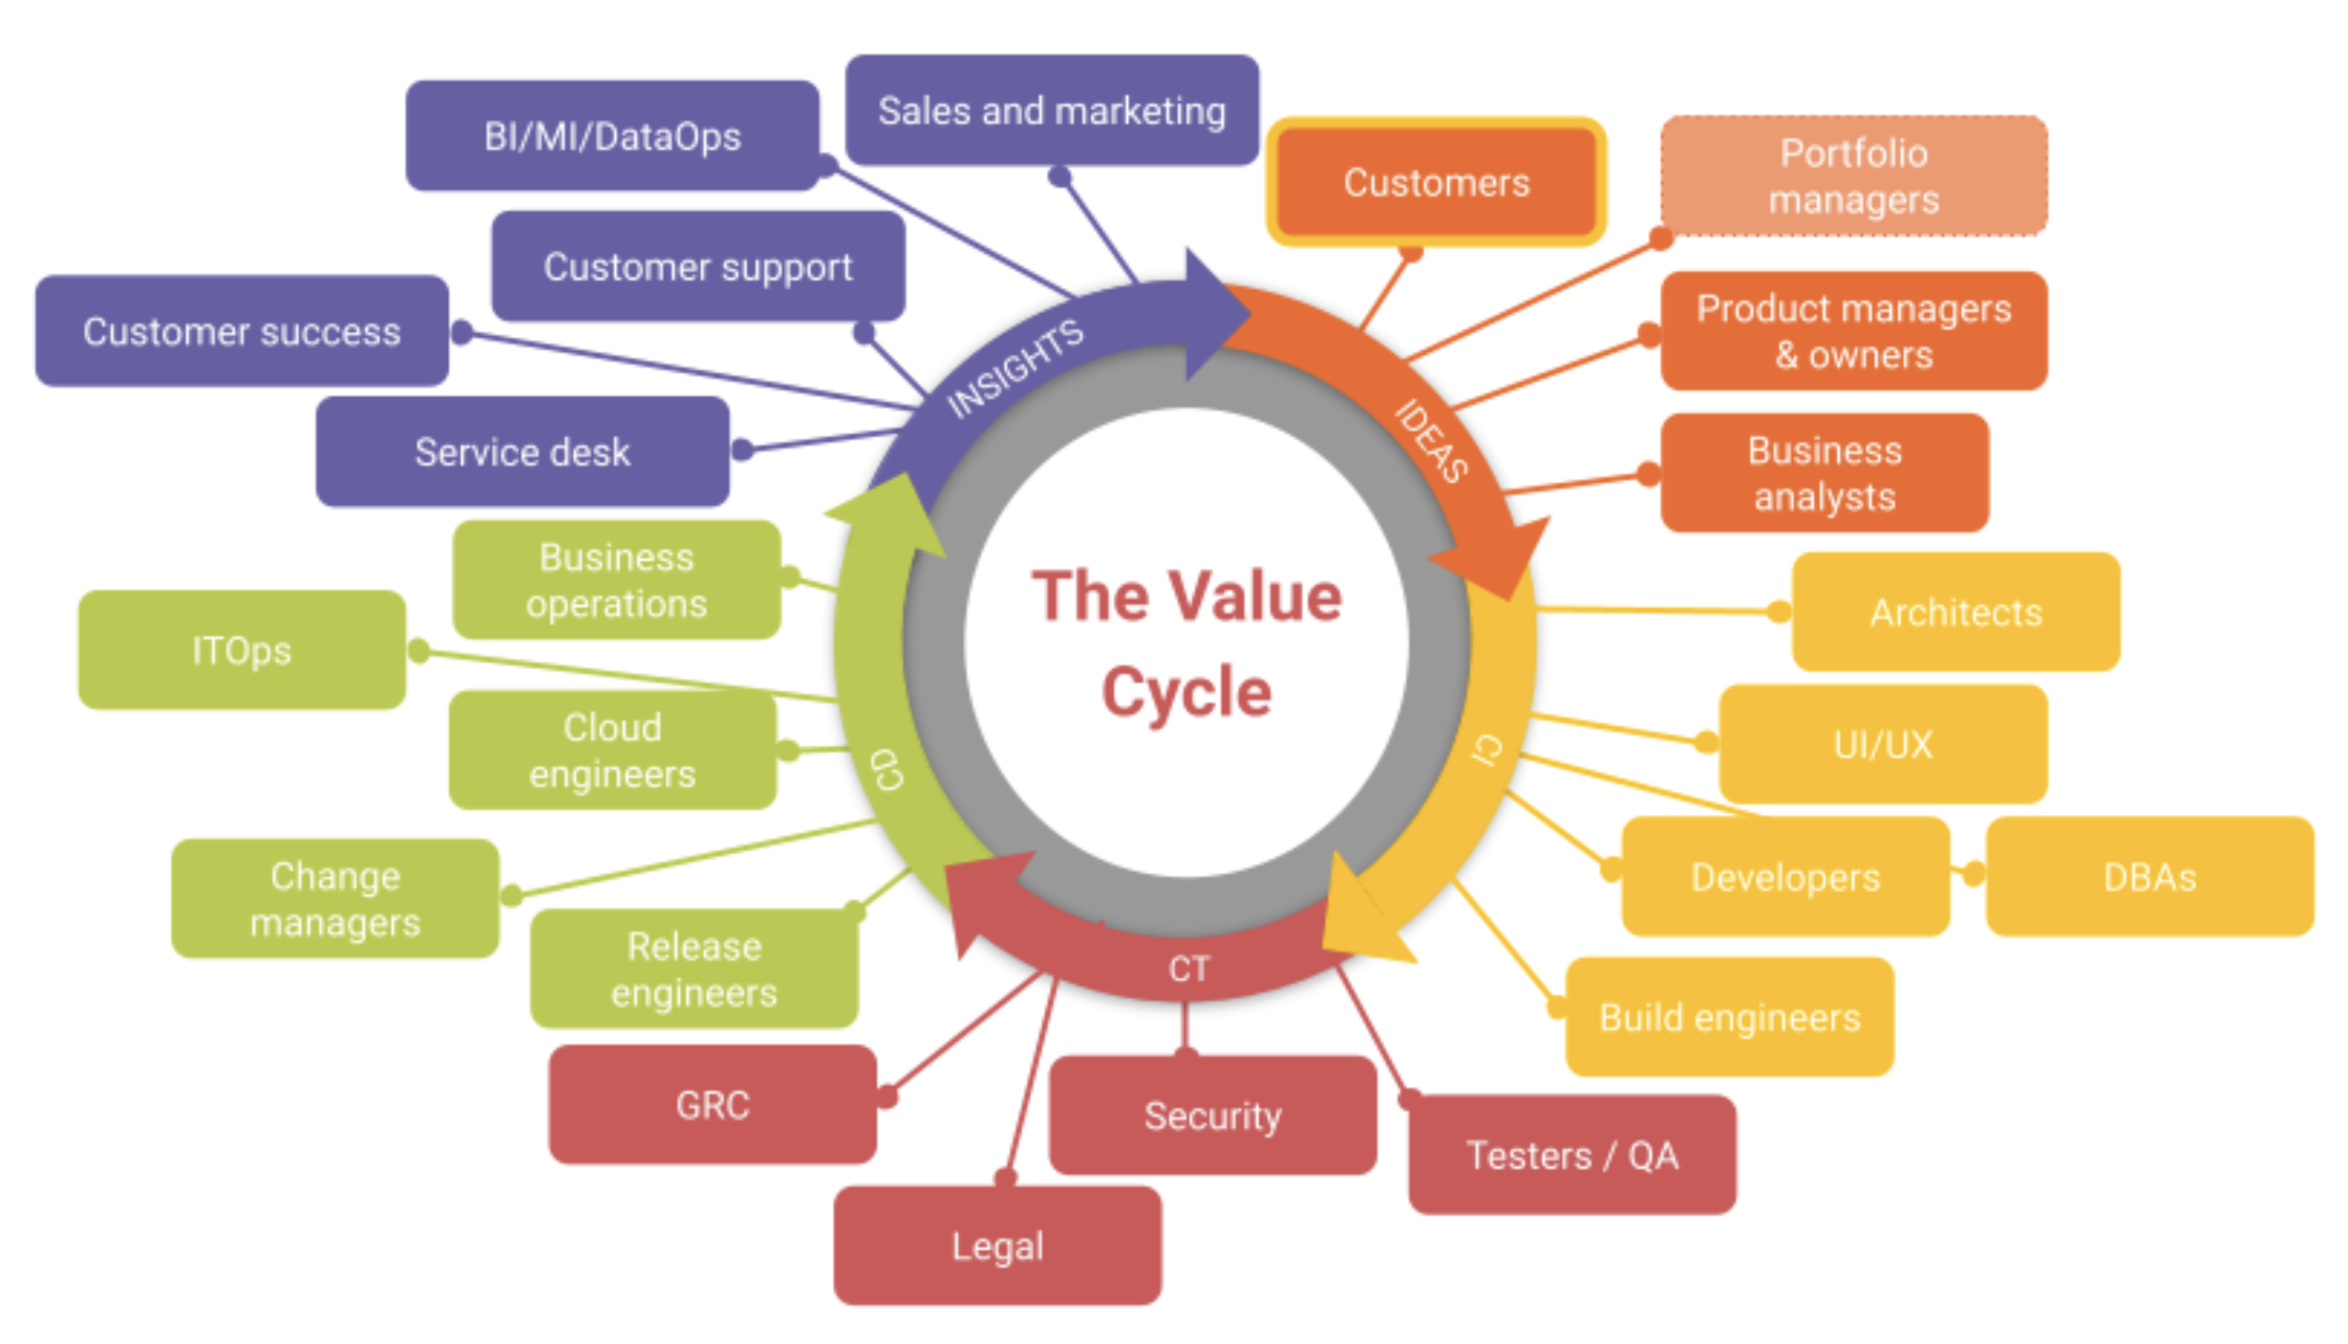 The Value Cycle